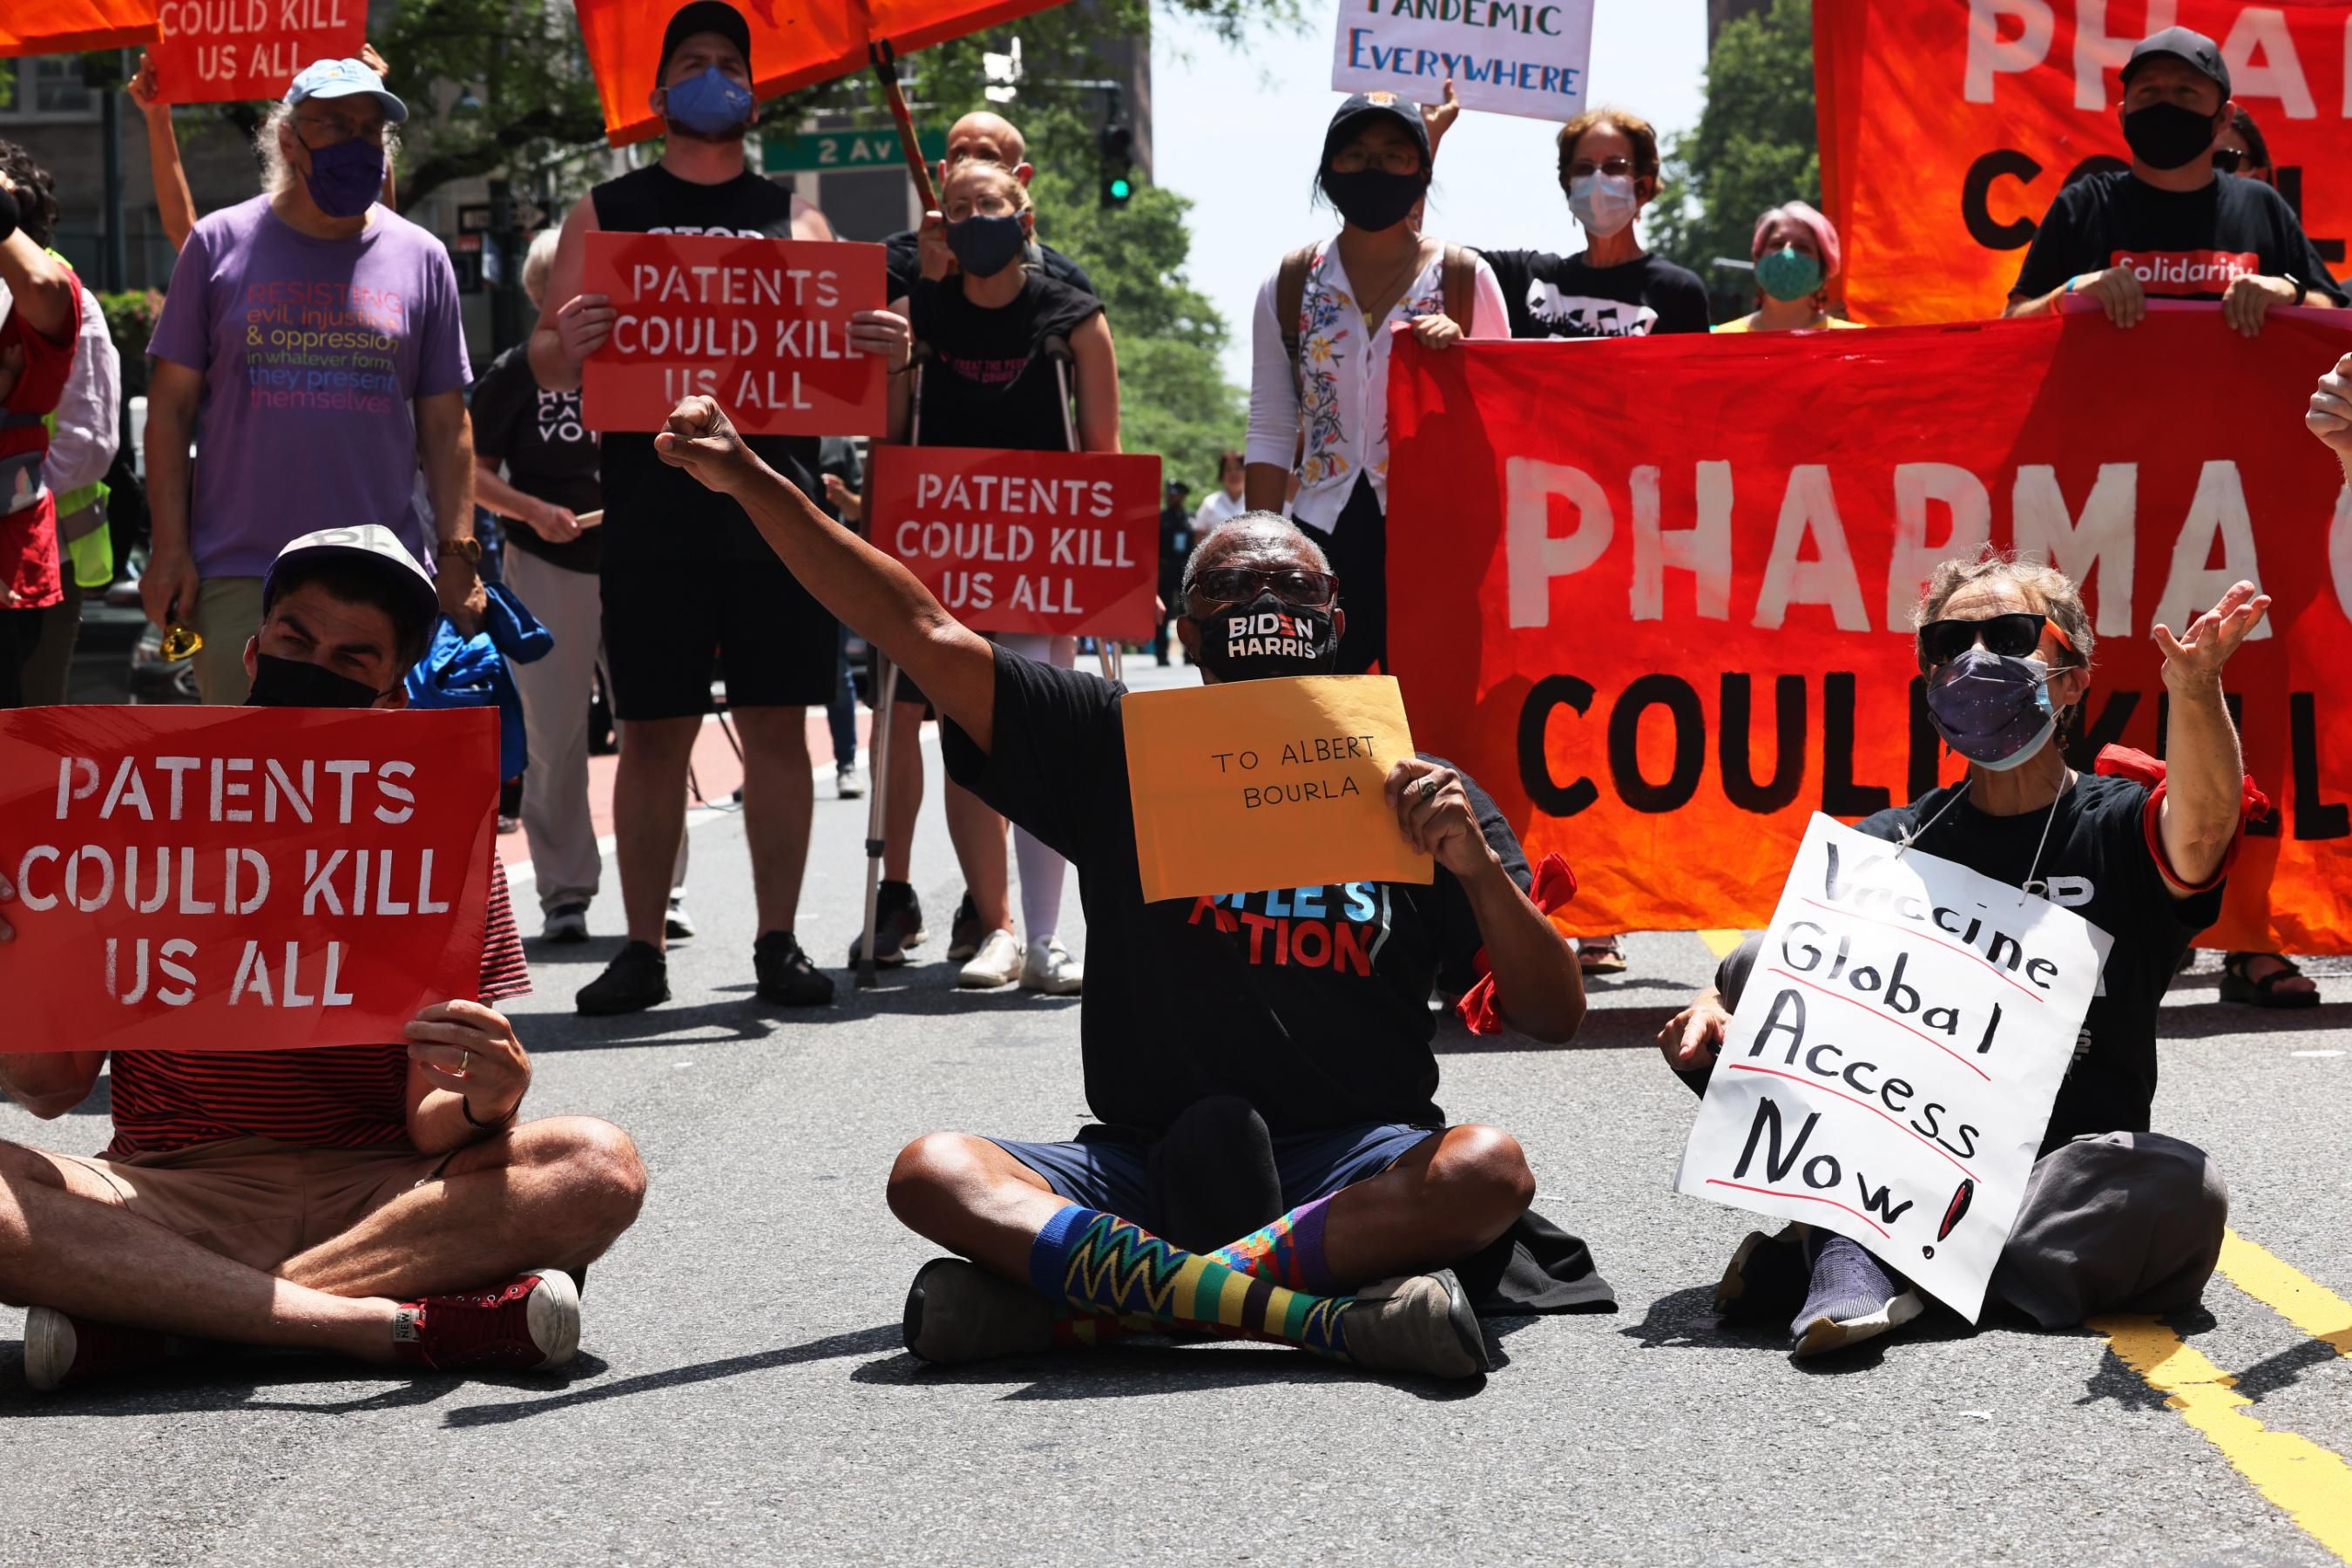 People hold a sit-in during a protest to demand German Chancellor Angela Merkel and Pfizer make Covid-19 vaccines and treatments more accessible outside the pharmaceutical company's headquarters on July 14, 2021 in New York City. (Photo: Michael M. Santiago via Getty Images)